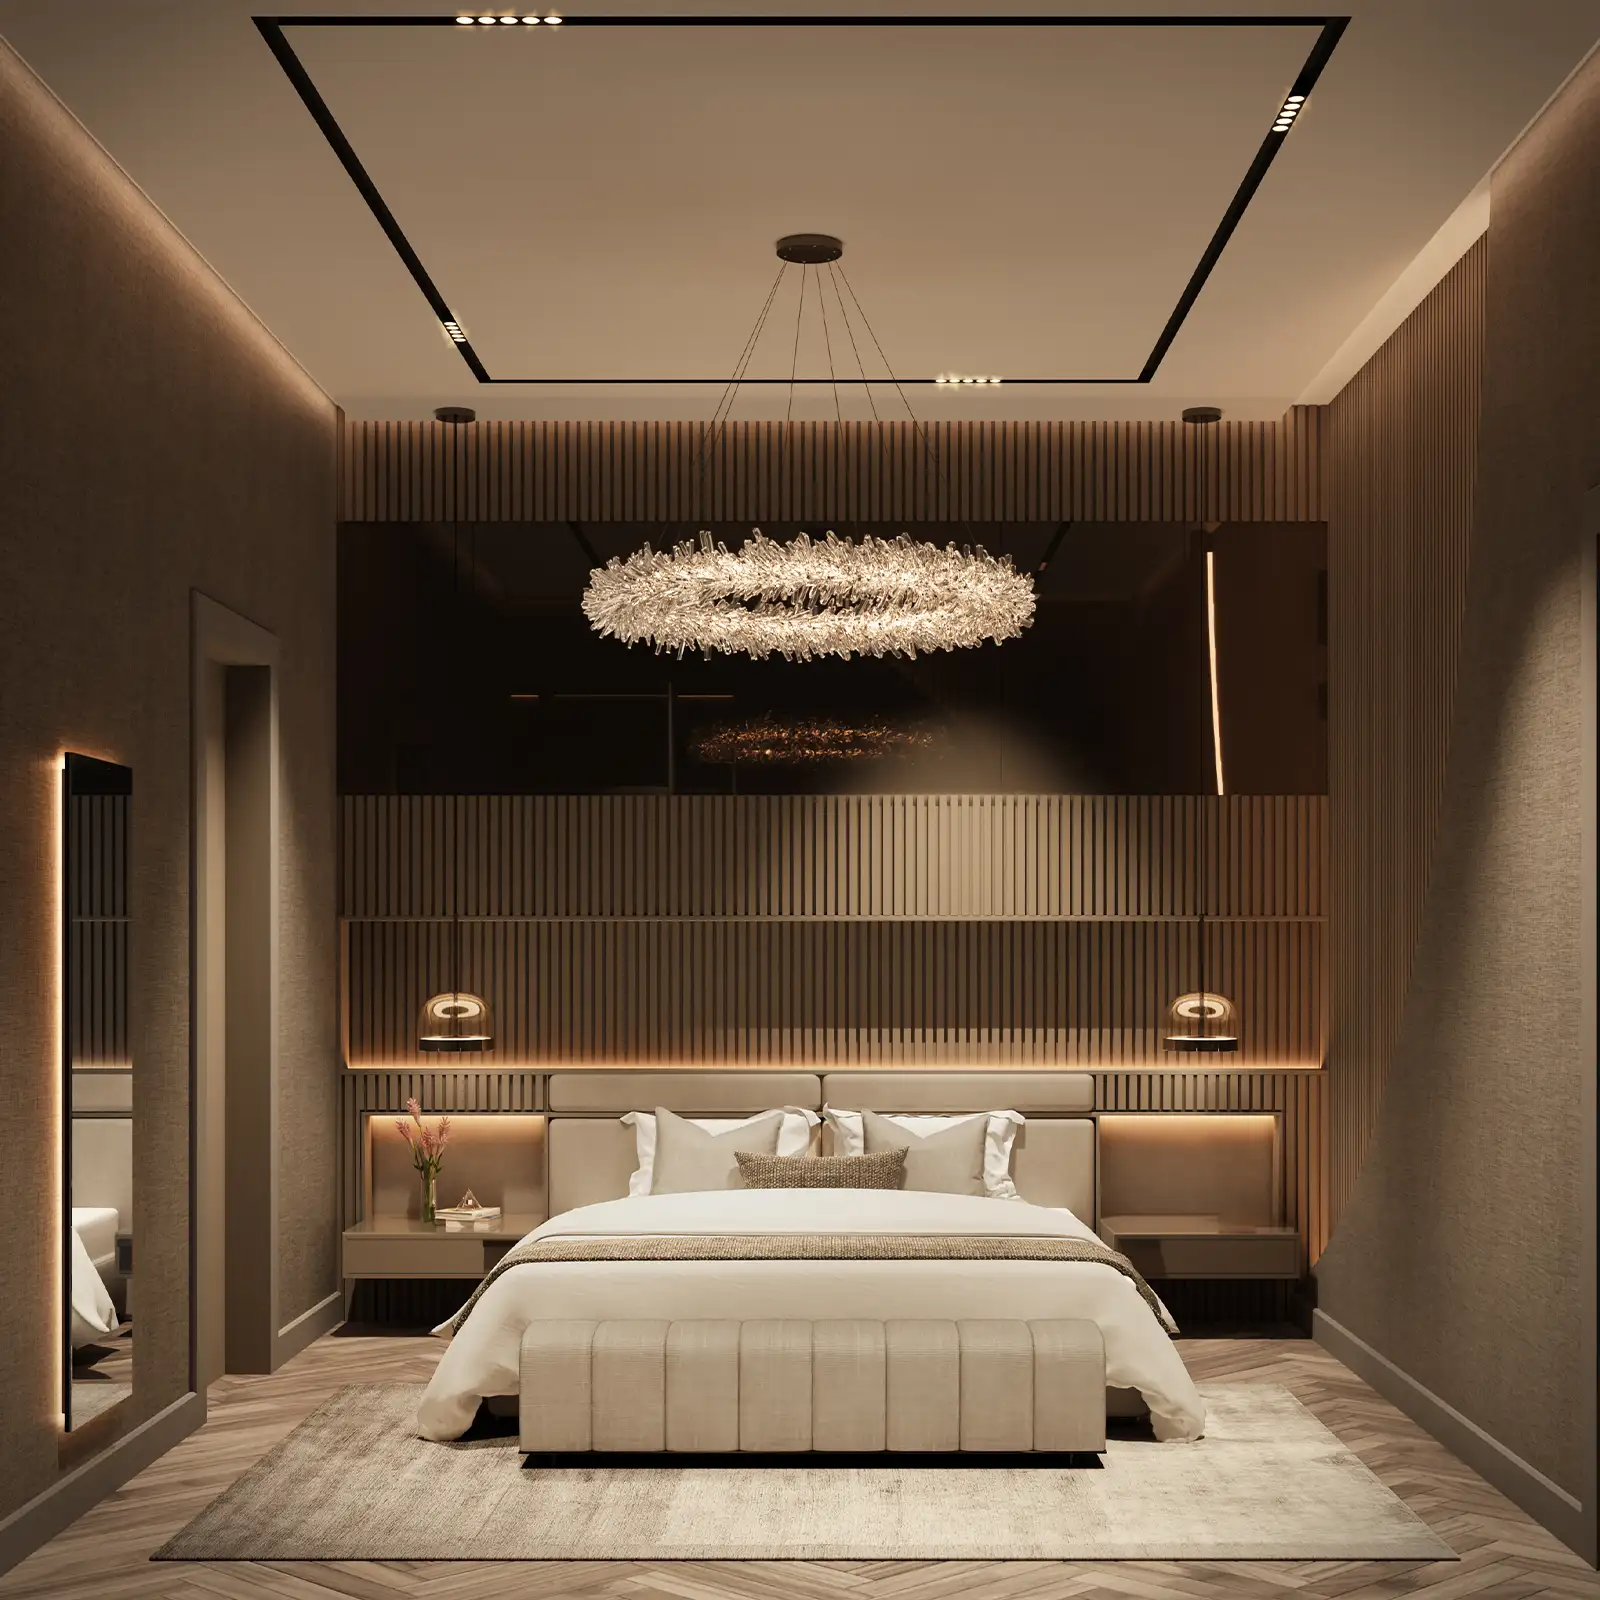 Contemporary bedroom featuring sleek wood paneling, a luxurious crystal chandelier, and plush bedding - a perfect blend of comfort and modern interior design aesthetics